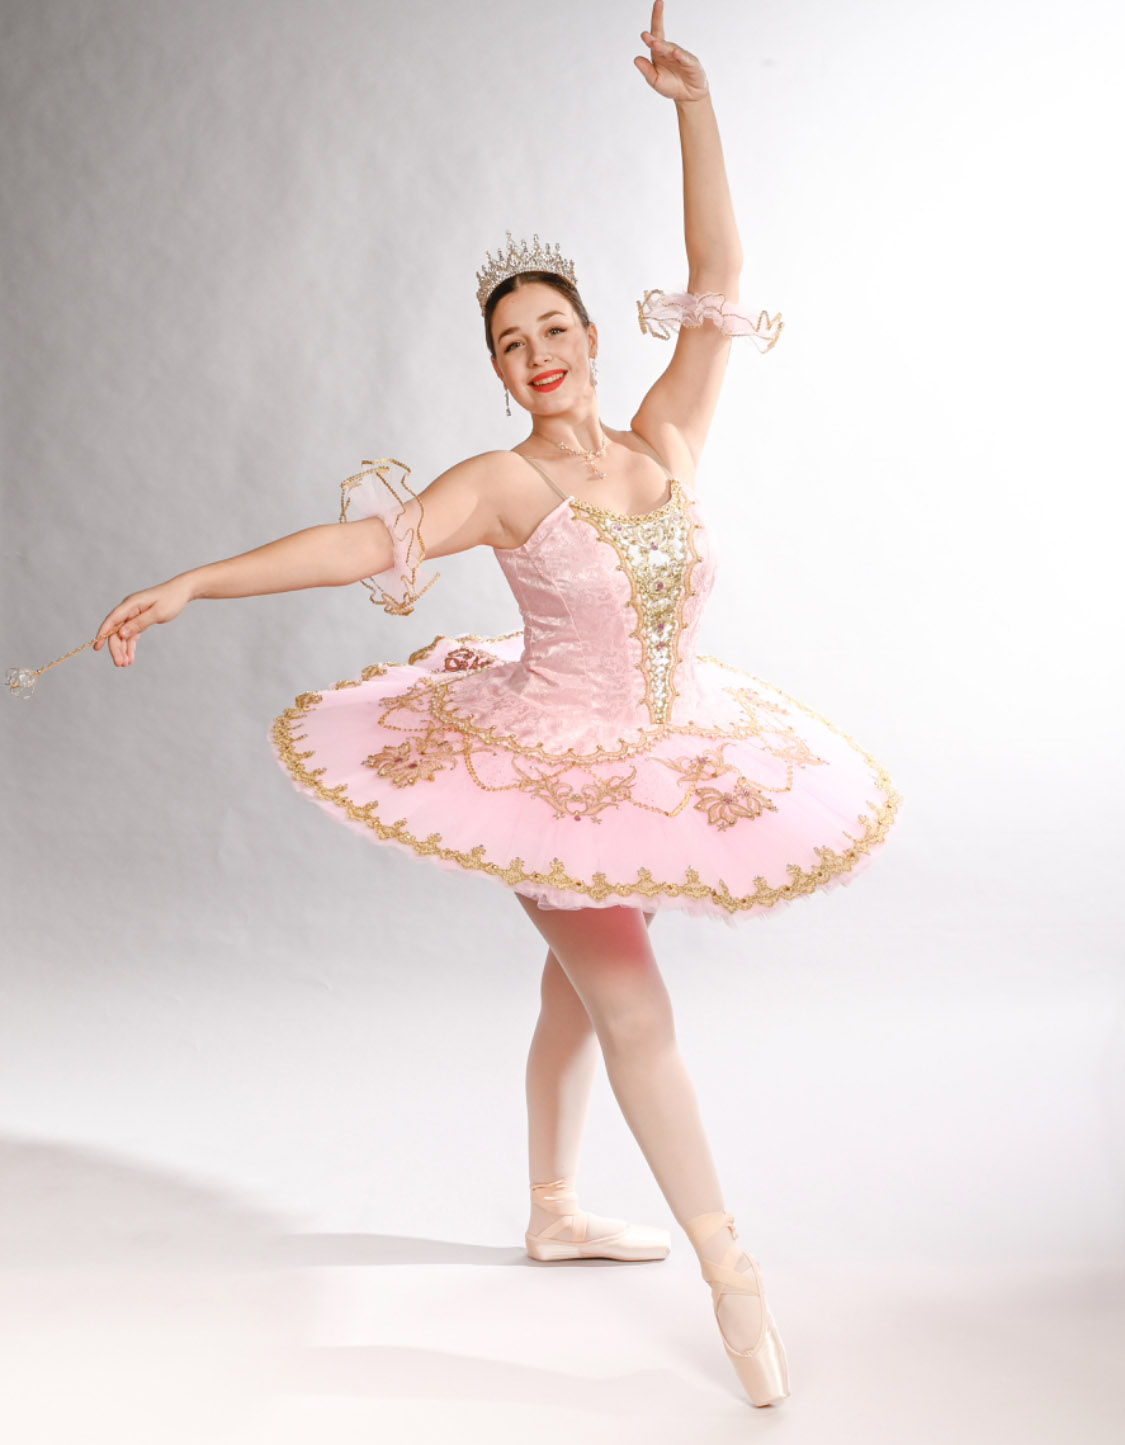  An image of Nicole in a pink ballet tutu. 